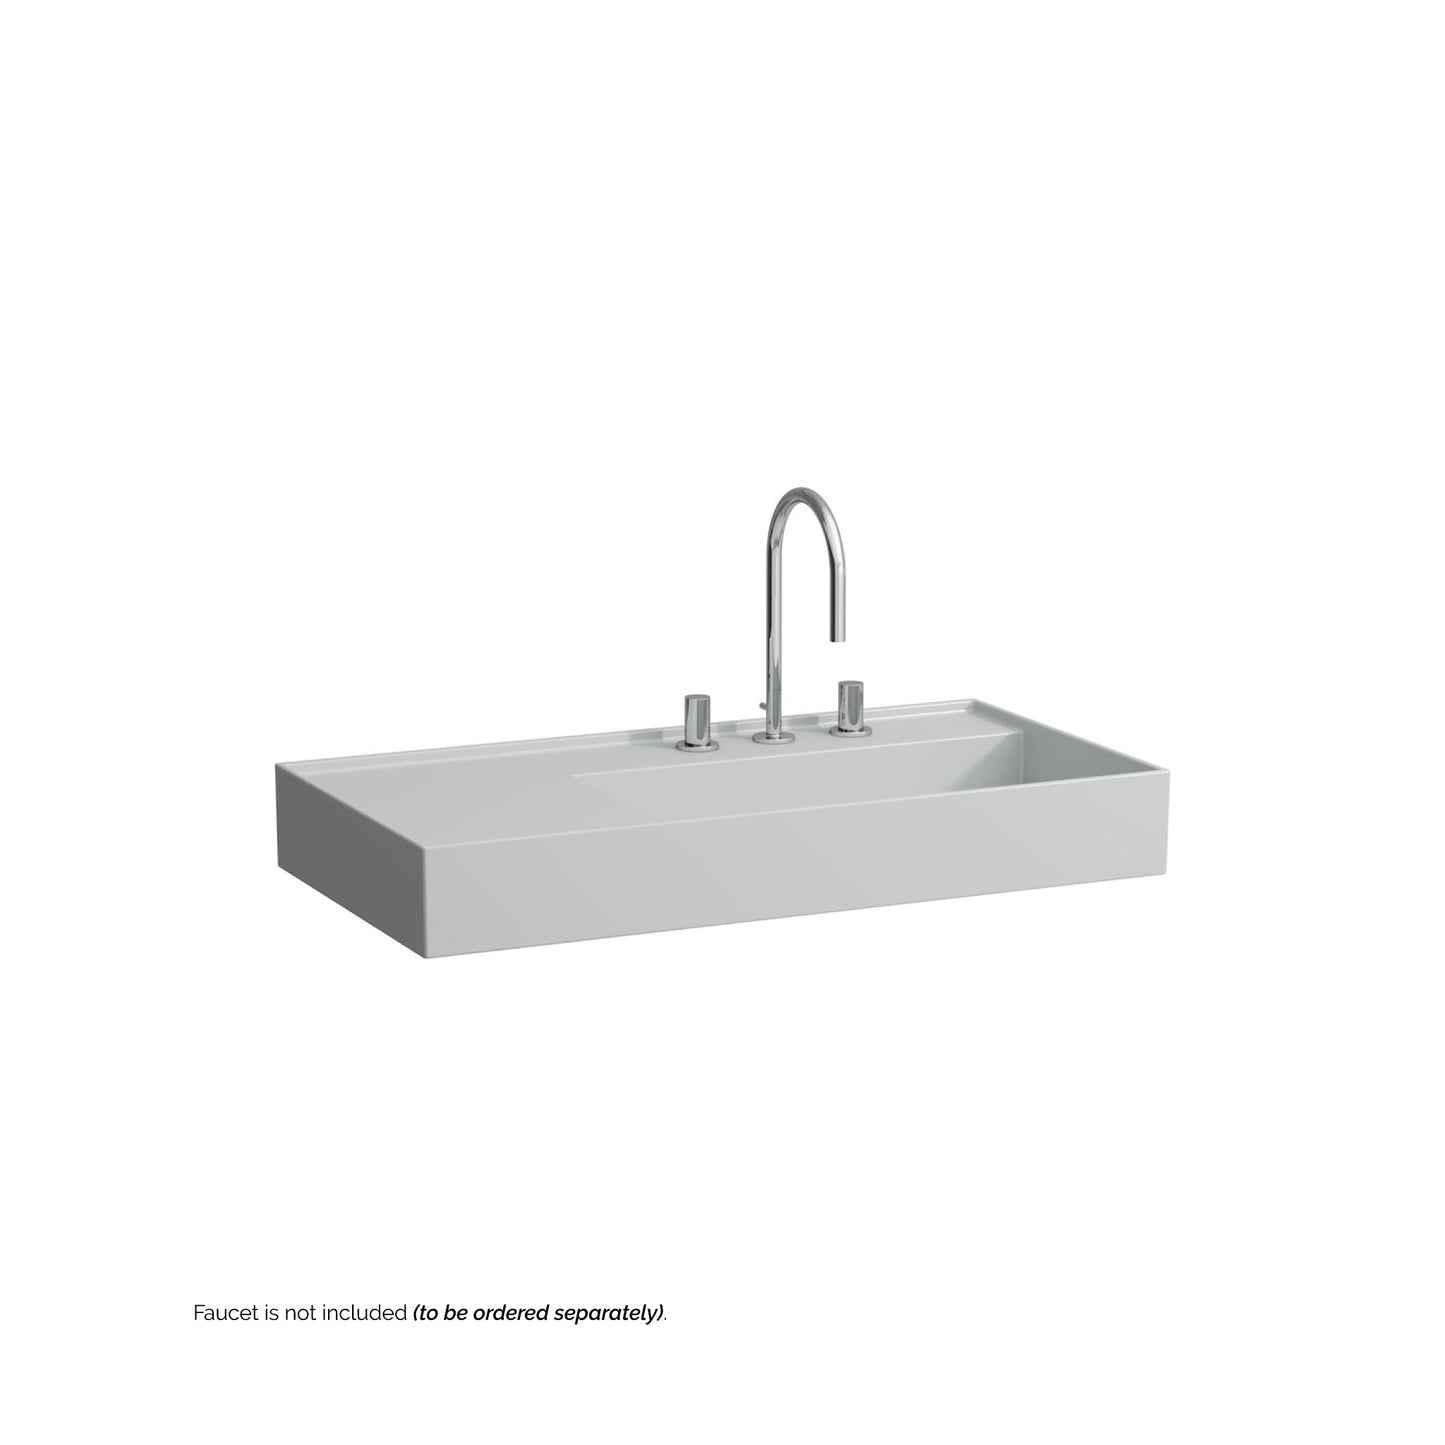 Laufen Kartell 35" x 18" Matte Gray Wall-Mounted Shelf-Left Bathroom Sink With 3 Faucet Holes